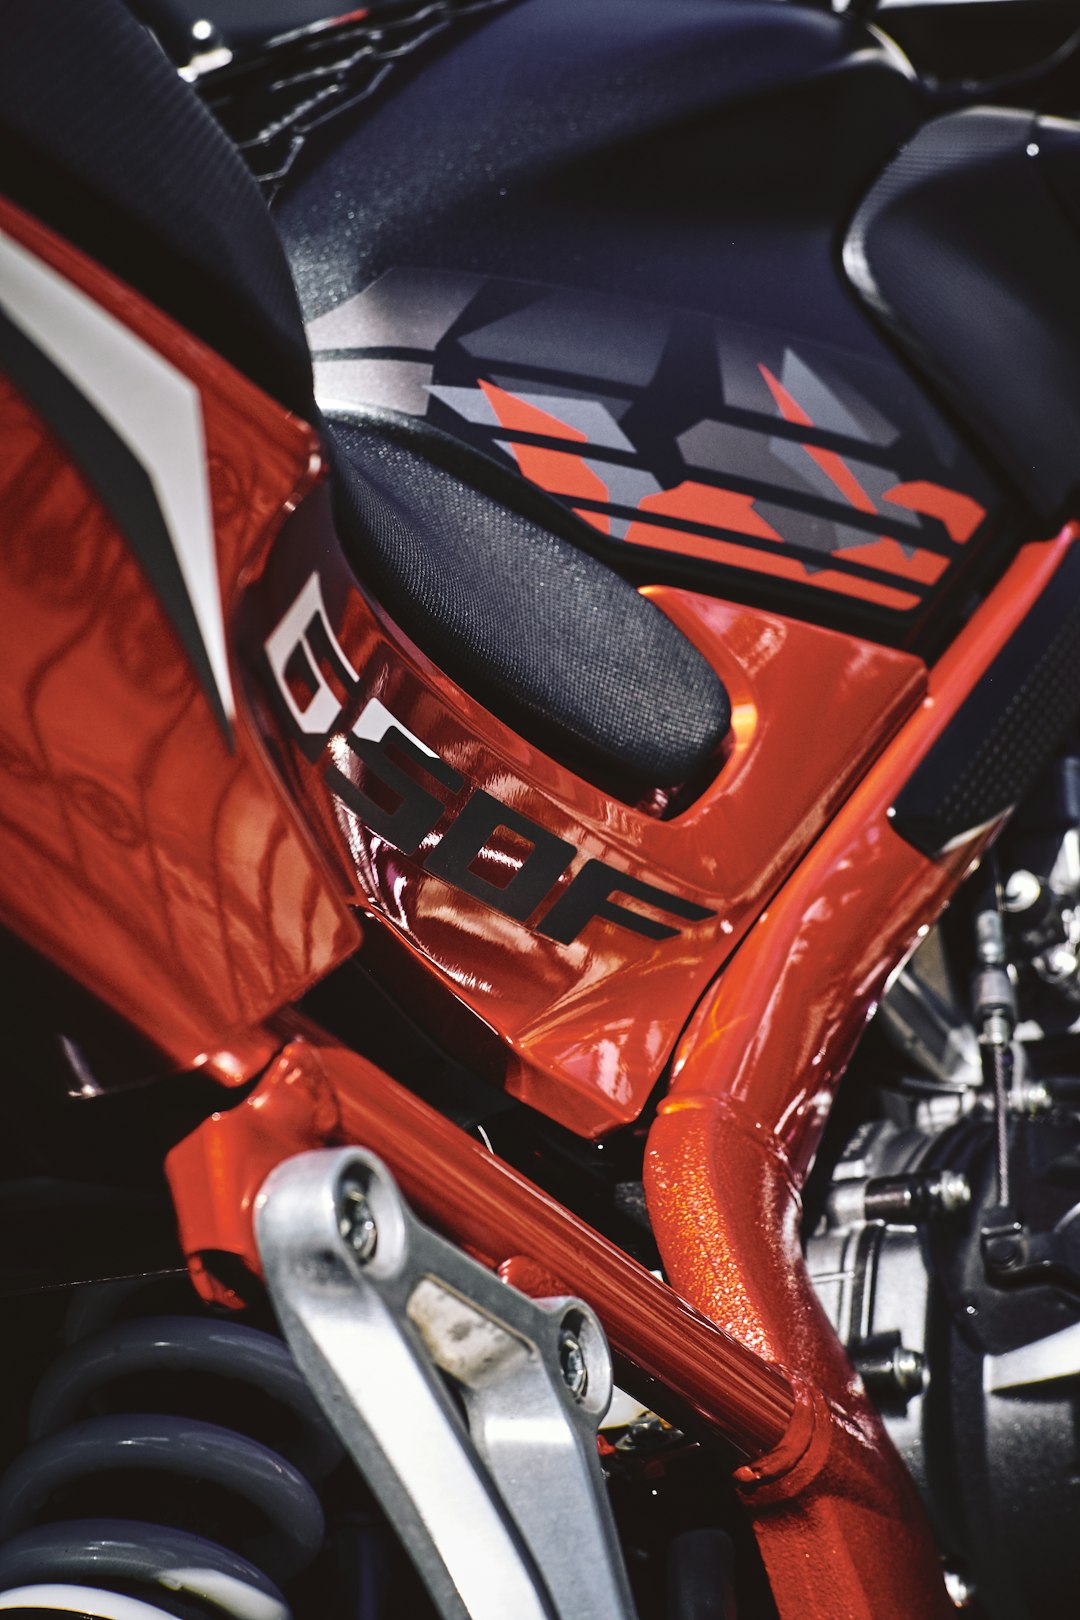 red and black motorcycle engine